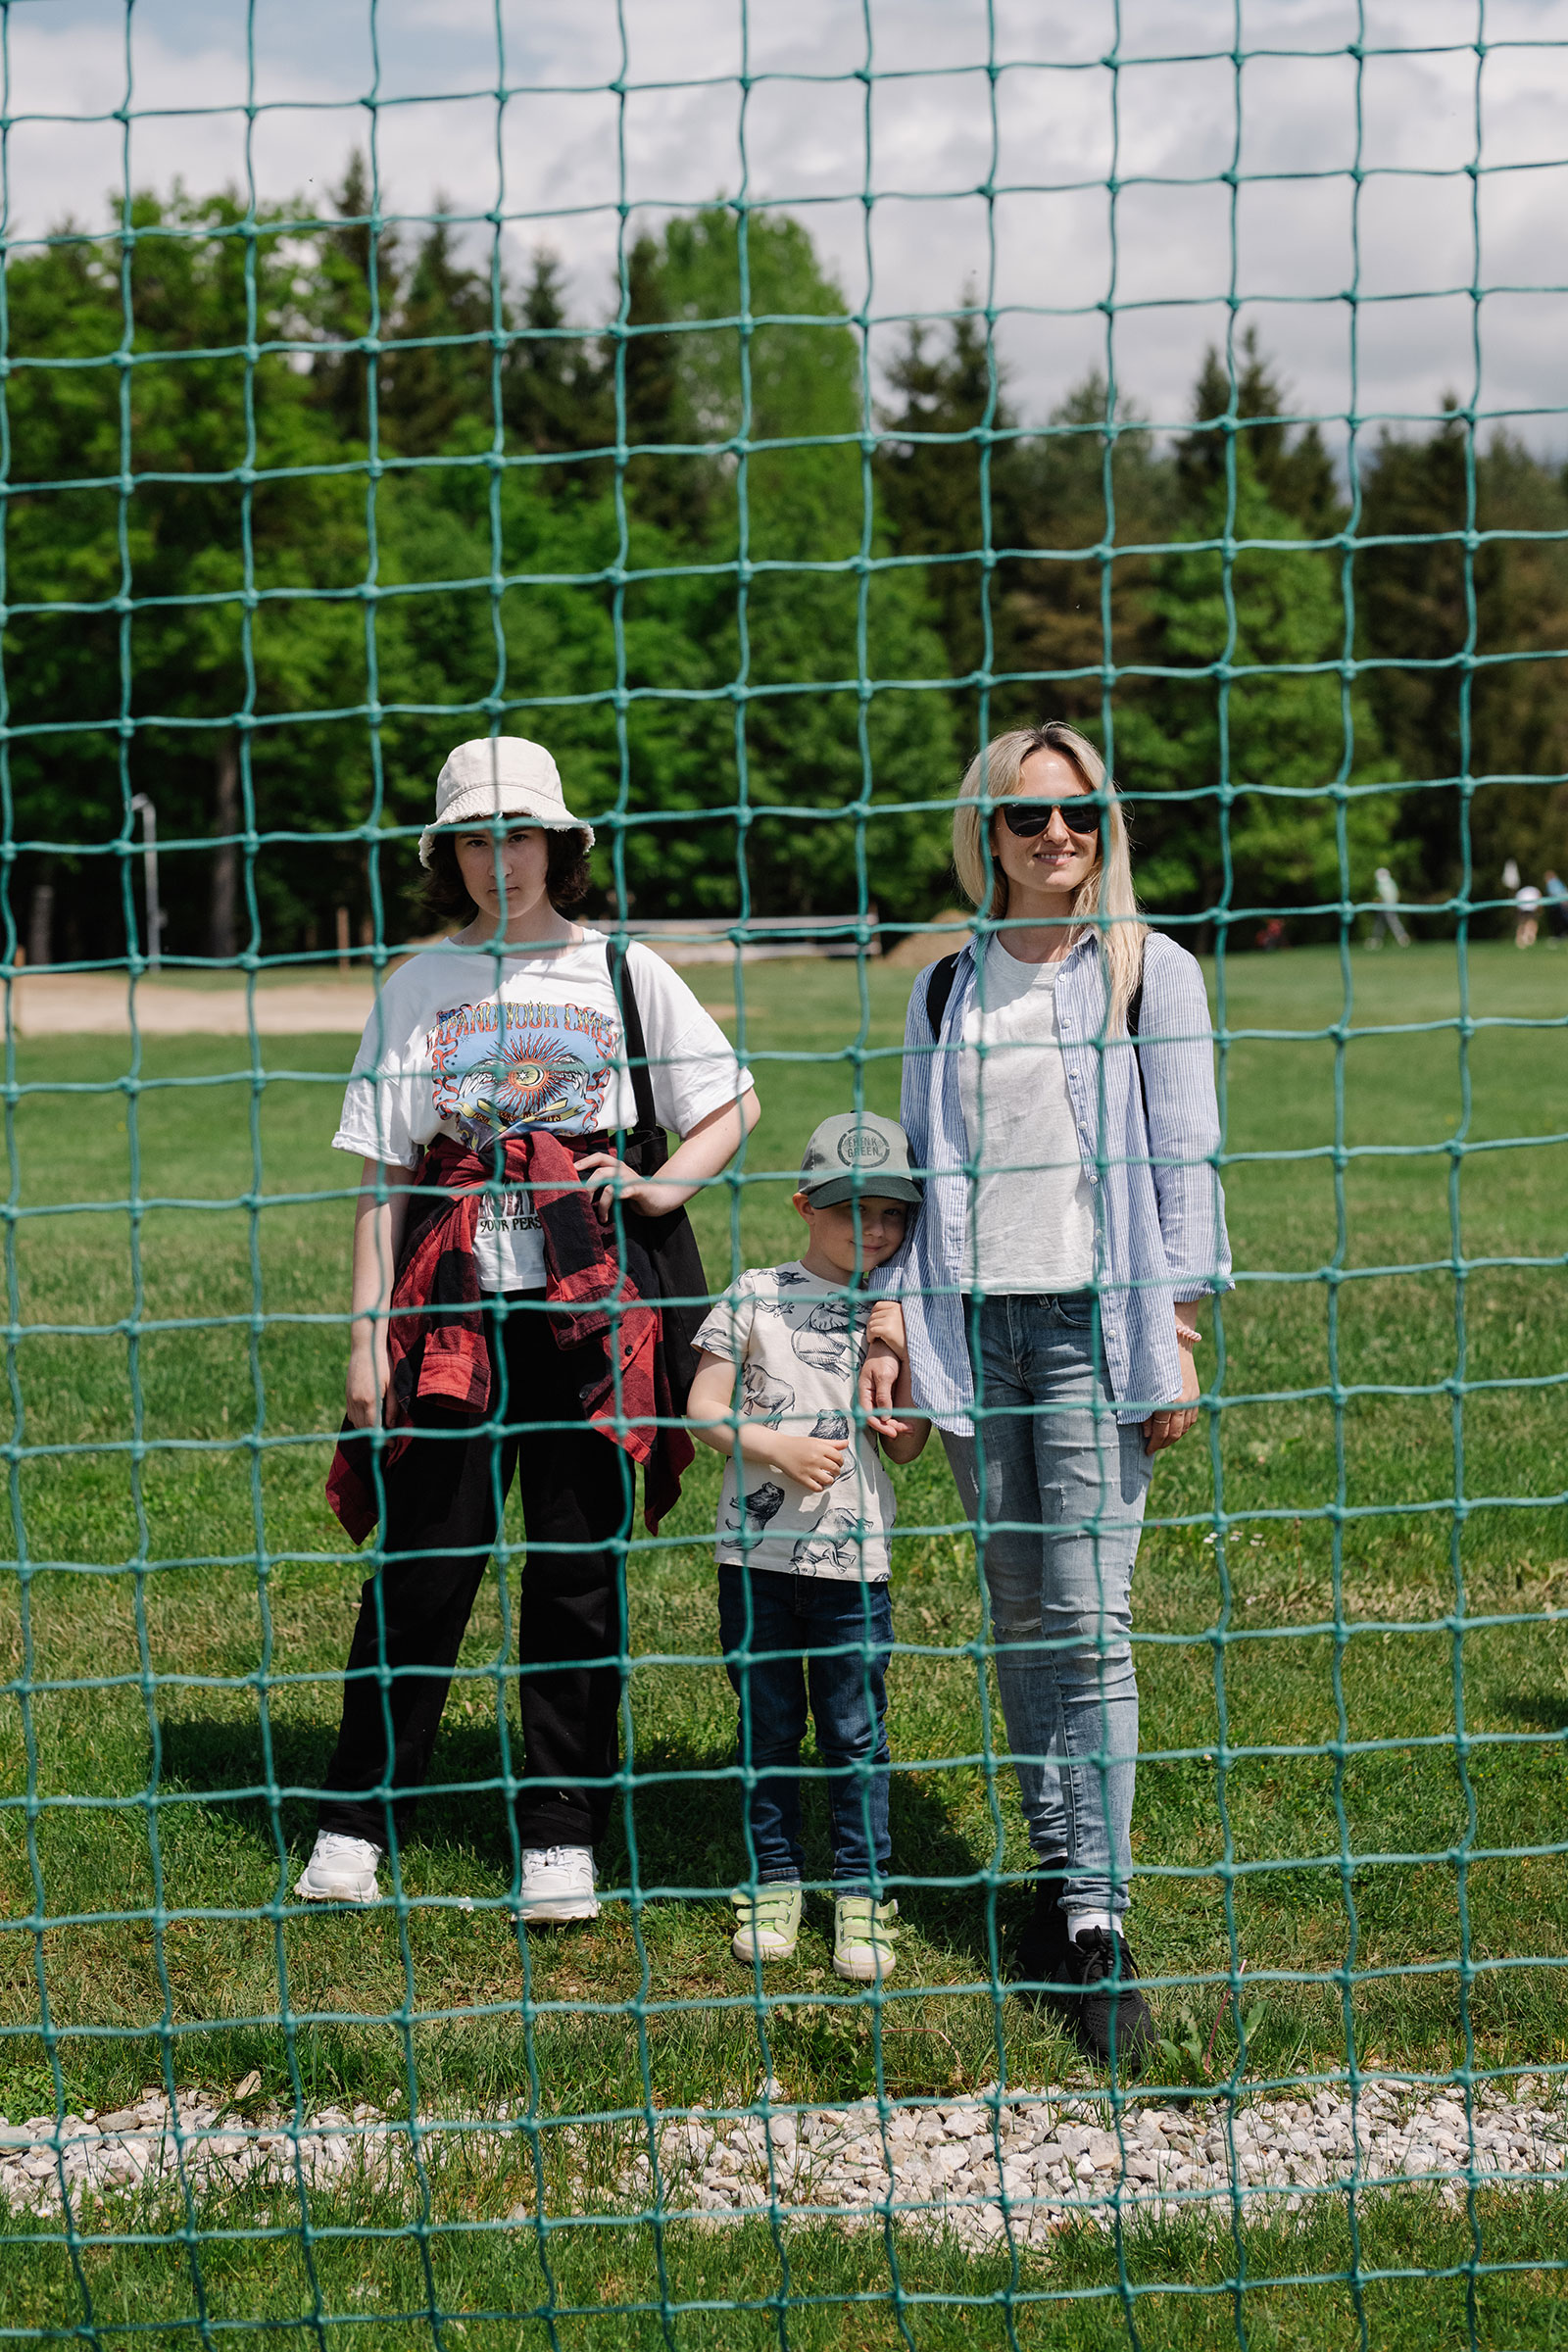 Kseniia Nikitina, from the Ukrainian city of Zhytomyr, watches the team train, along with her 12-year-old daughter Alisa, and 4-year-old son Martin (Ciril Jazbec for TIME)